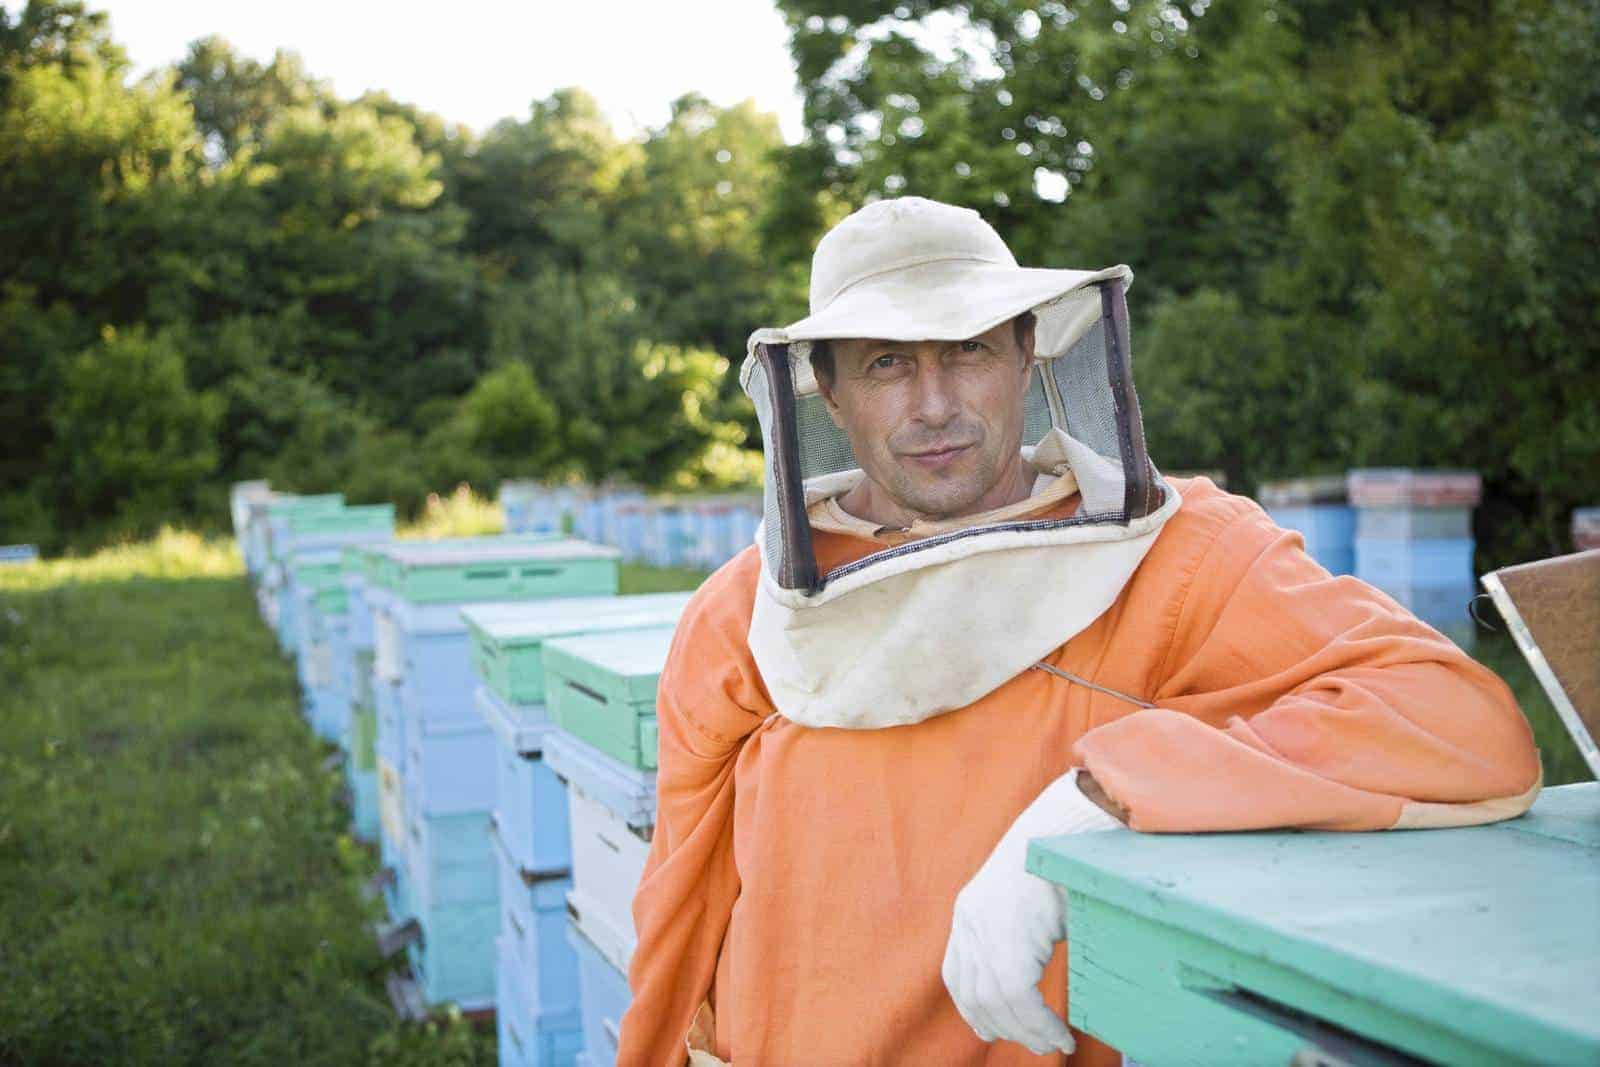 How hard work is it being a beekeeper?